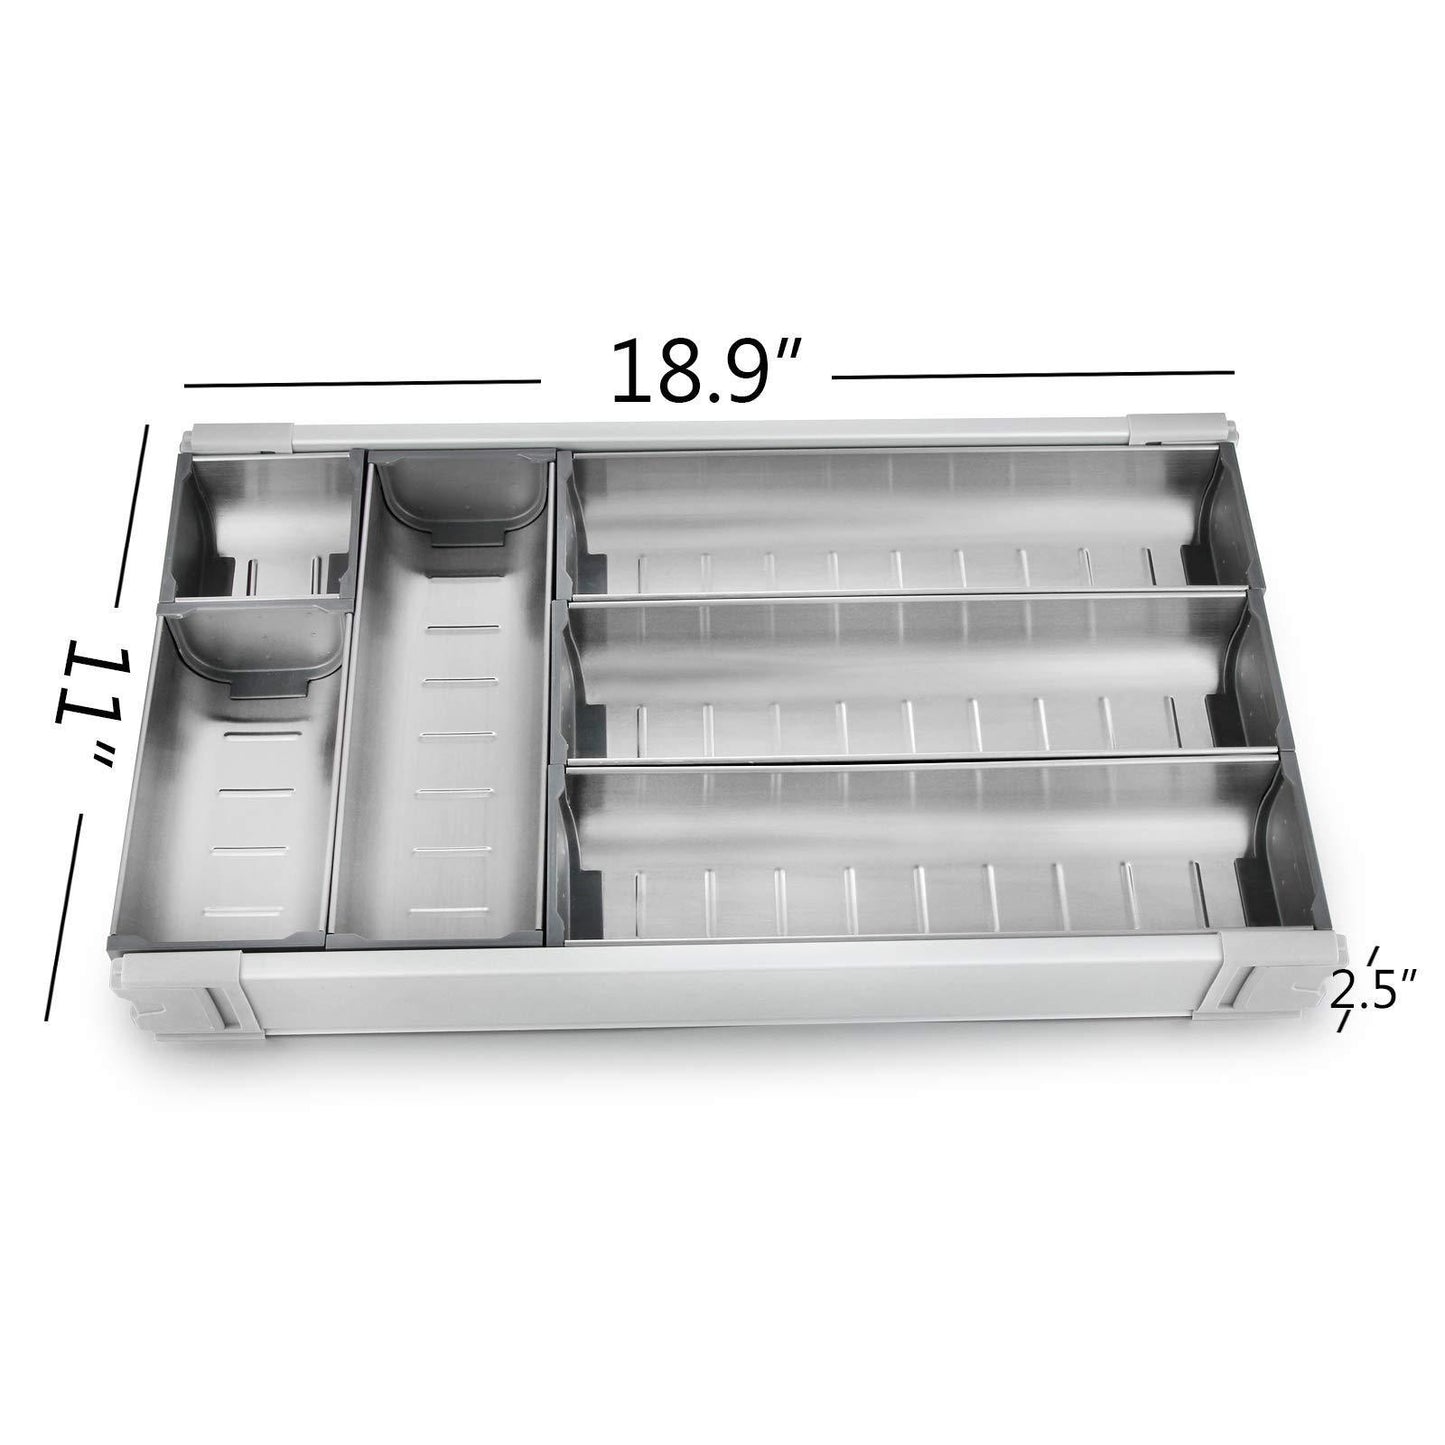 Discover the drawer insert cabinet cutlery tray storage catering utensils box stainless steel kitchen 6 compartments 47 228 46 2cm